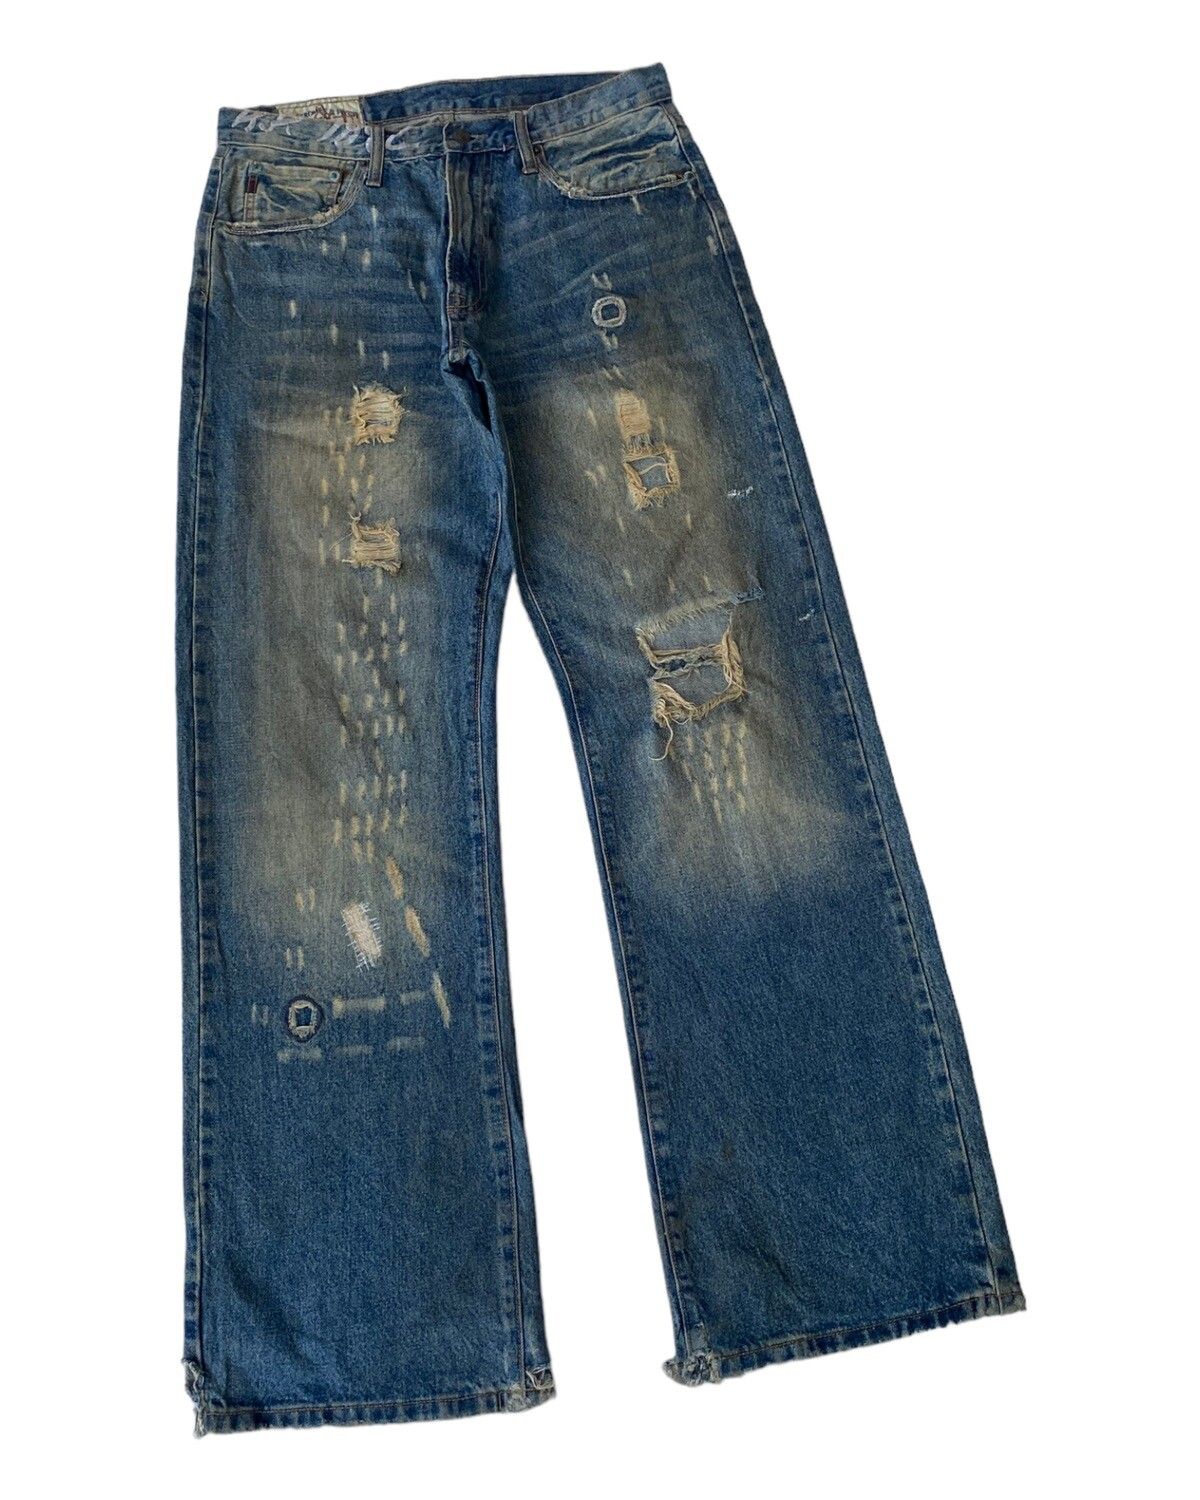 🔥FLARE JEANS RUSTY BAGGY ABERCROMBIE & FITCH DISTRESS DENIM - 3